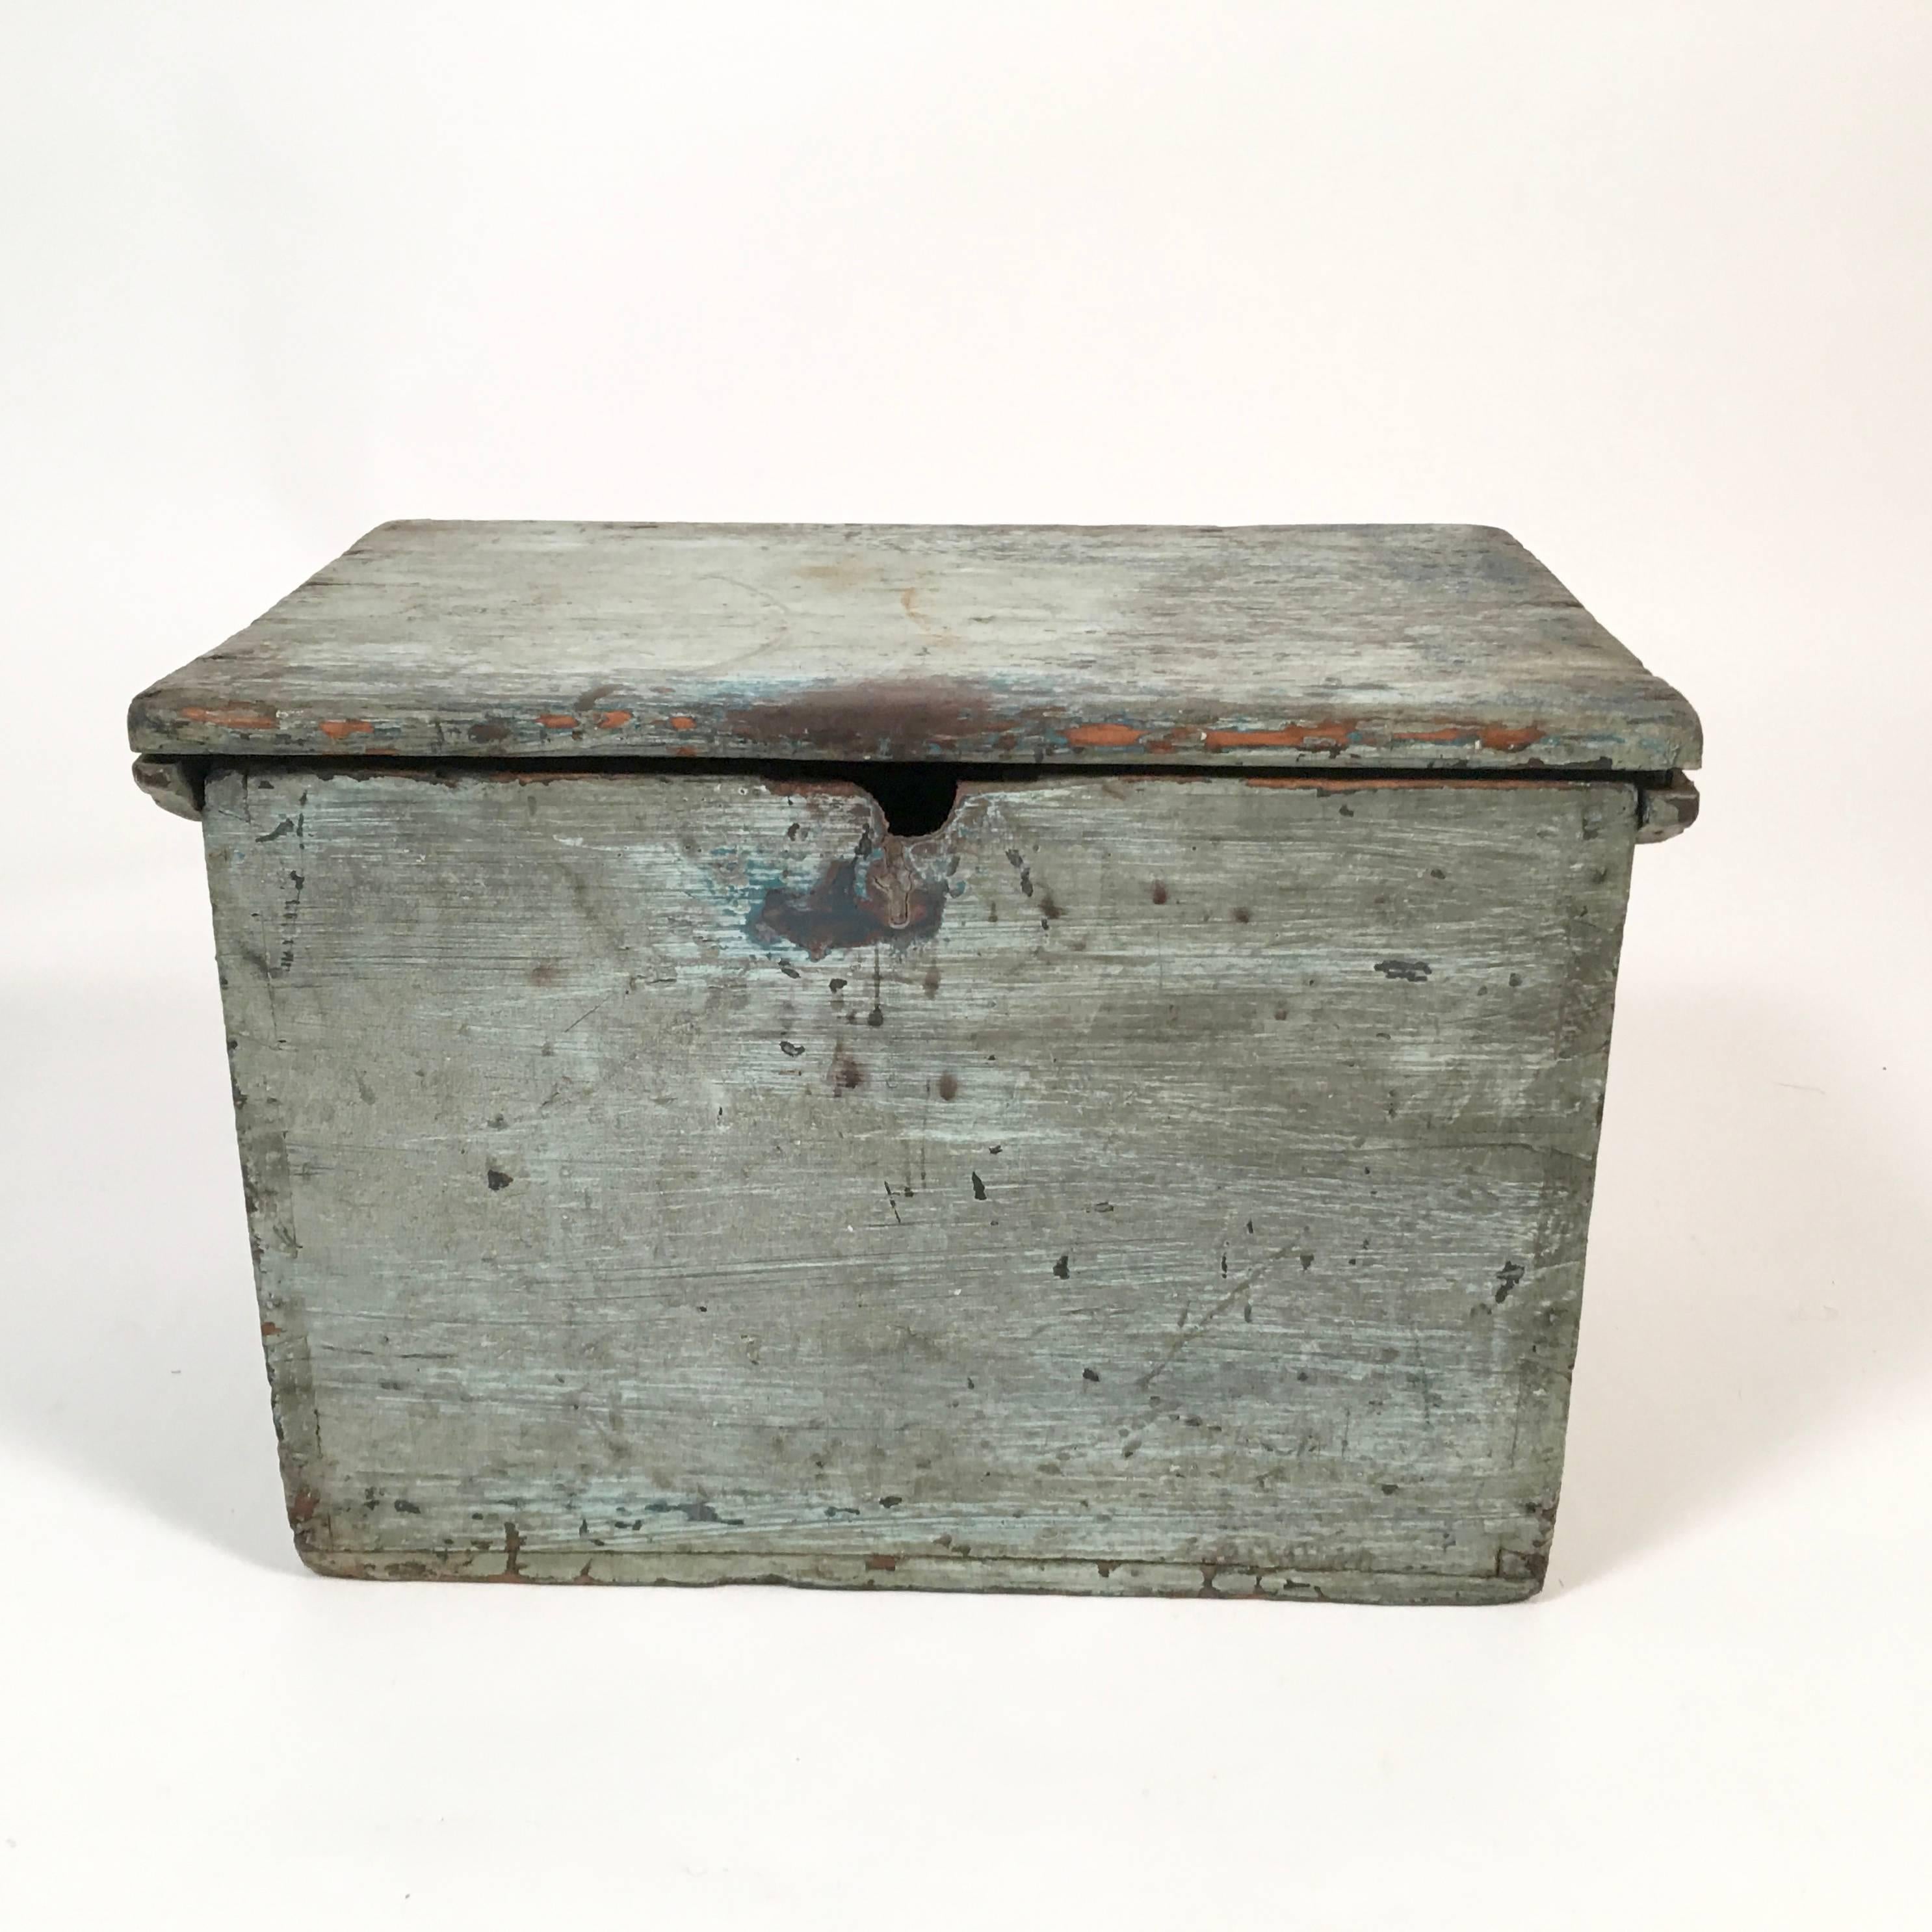 A Primitive blue country box from Maine with wonderful color and patina, in pine, with several old layers of blue paint and iron carrying handles on the side. Functional for storage of remote control devices or other things and great as a decorative